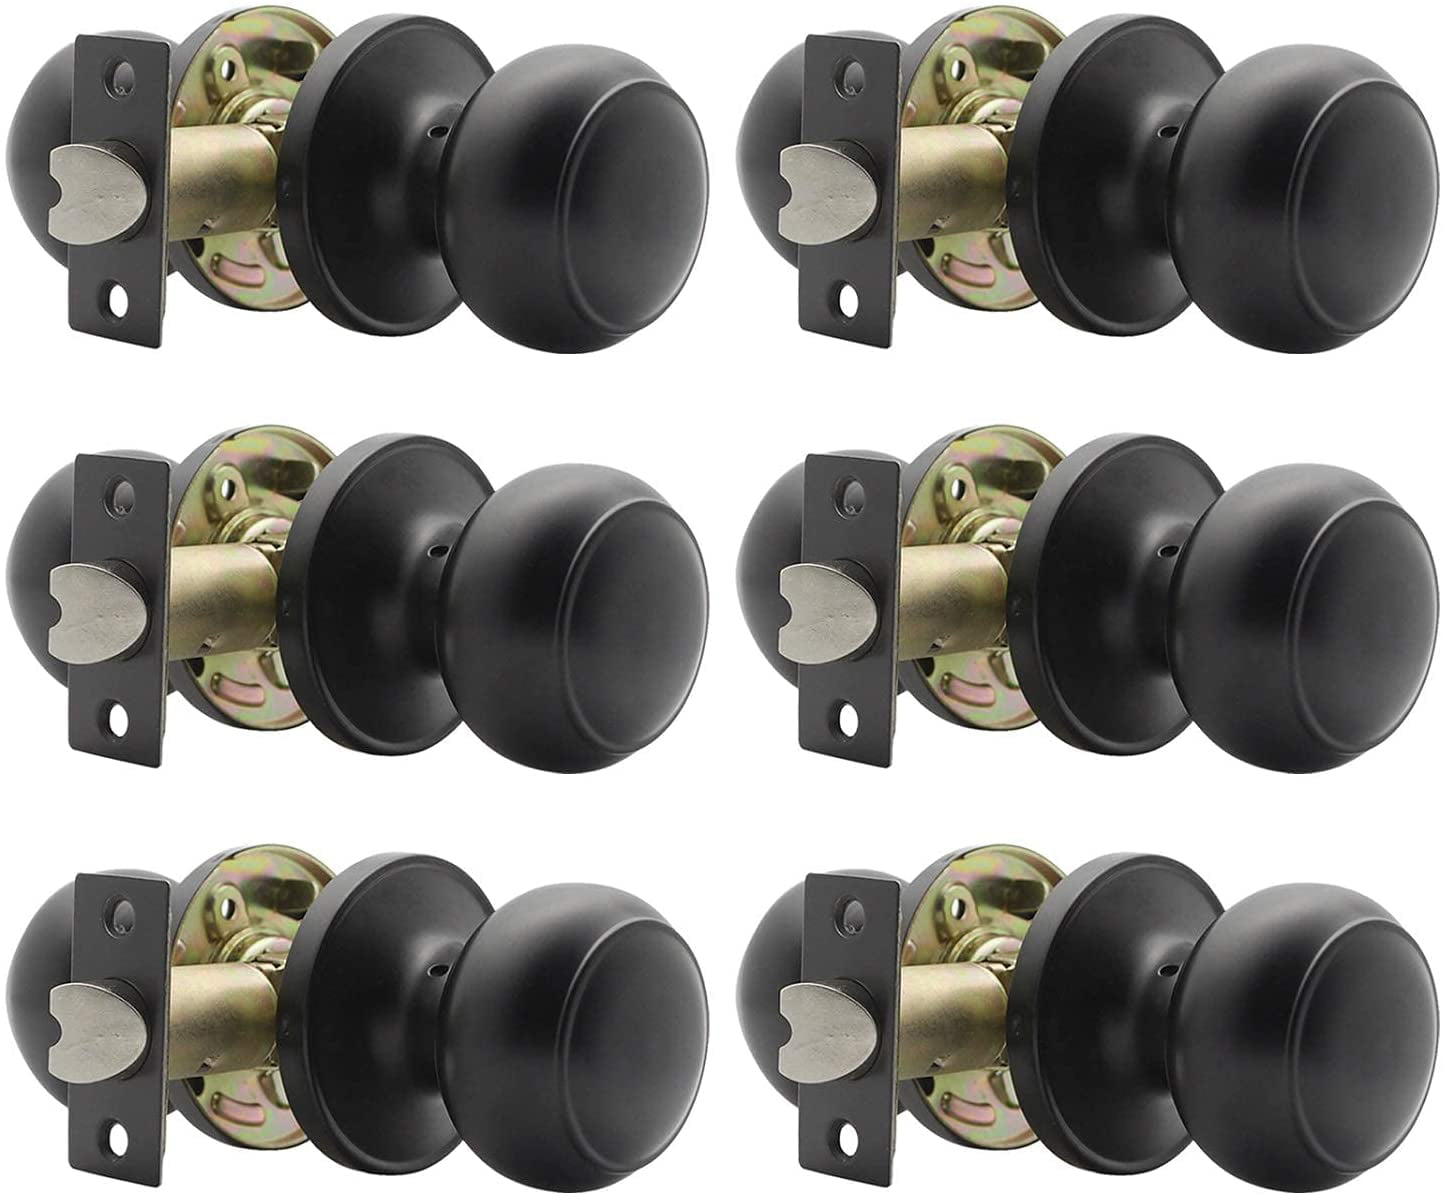 glass interior doors knobs with black base